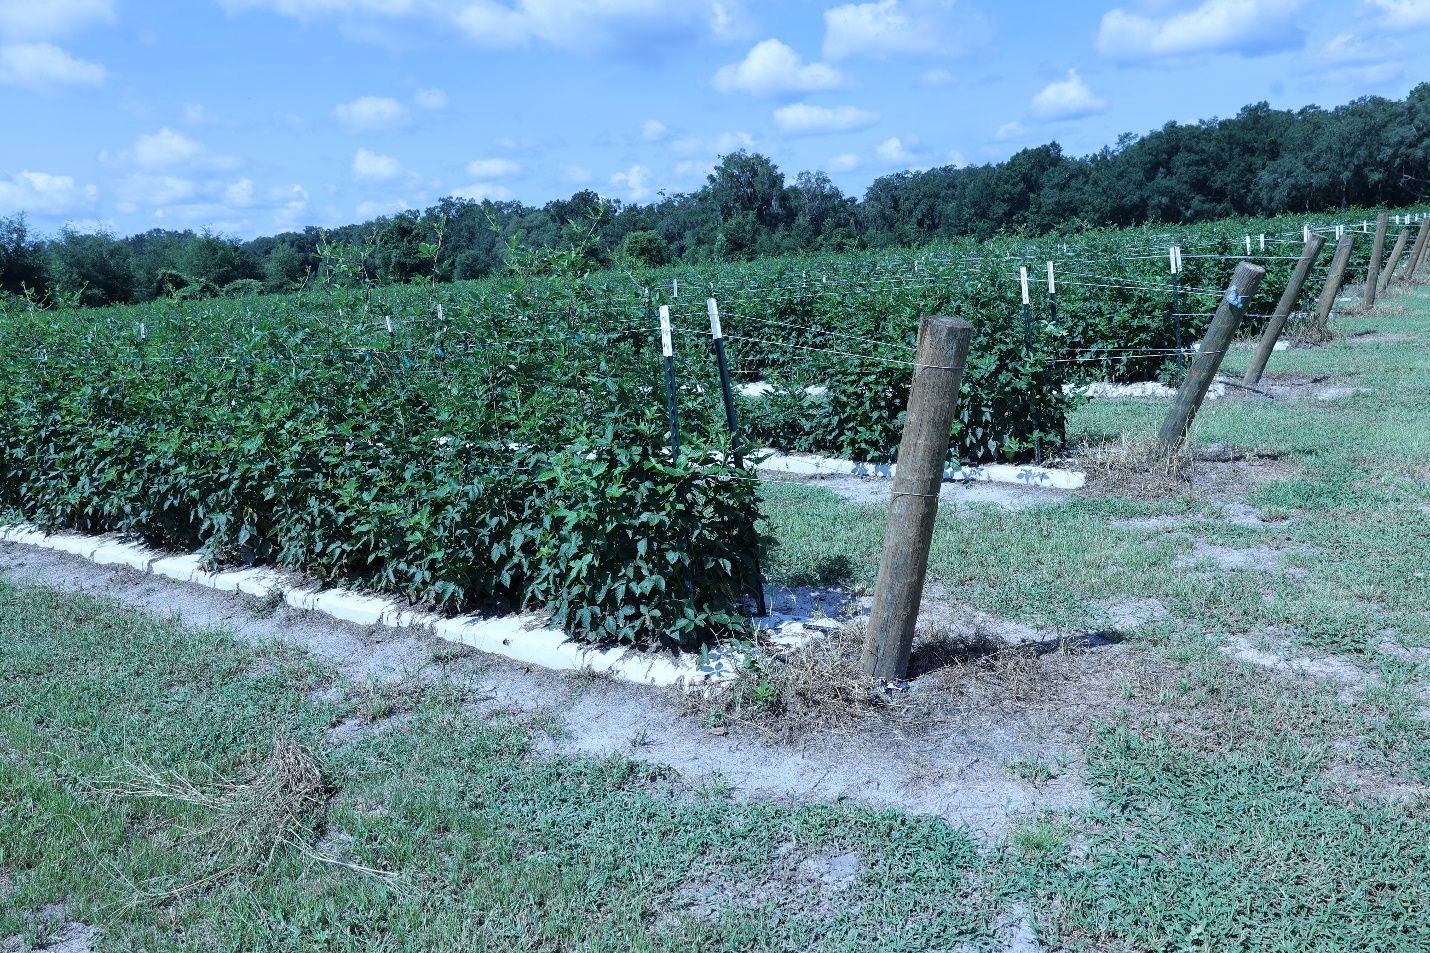 The parallel trellis system. Demonstration of a parallel trellis system in the field.